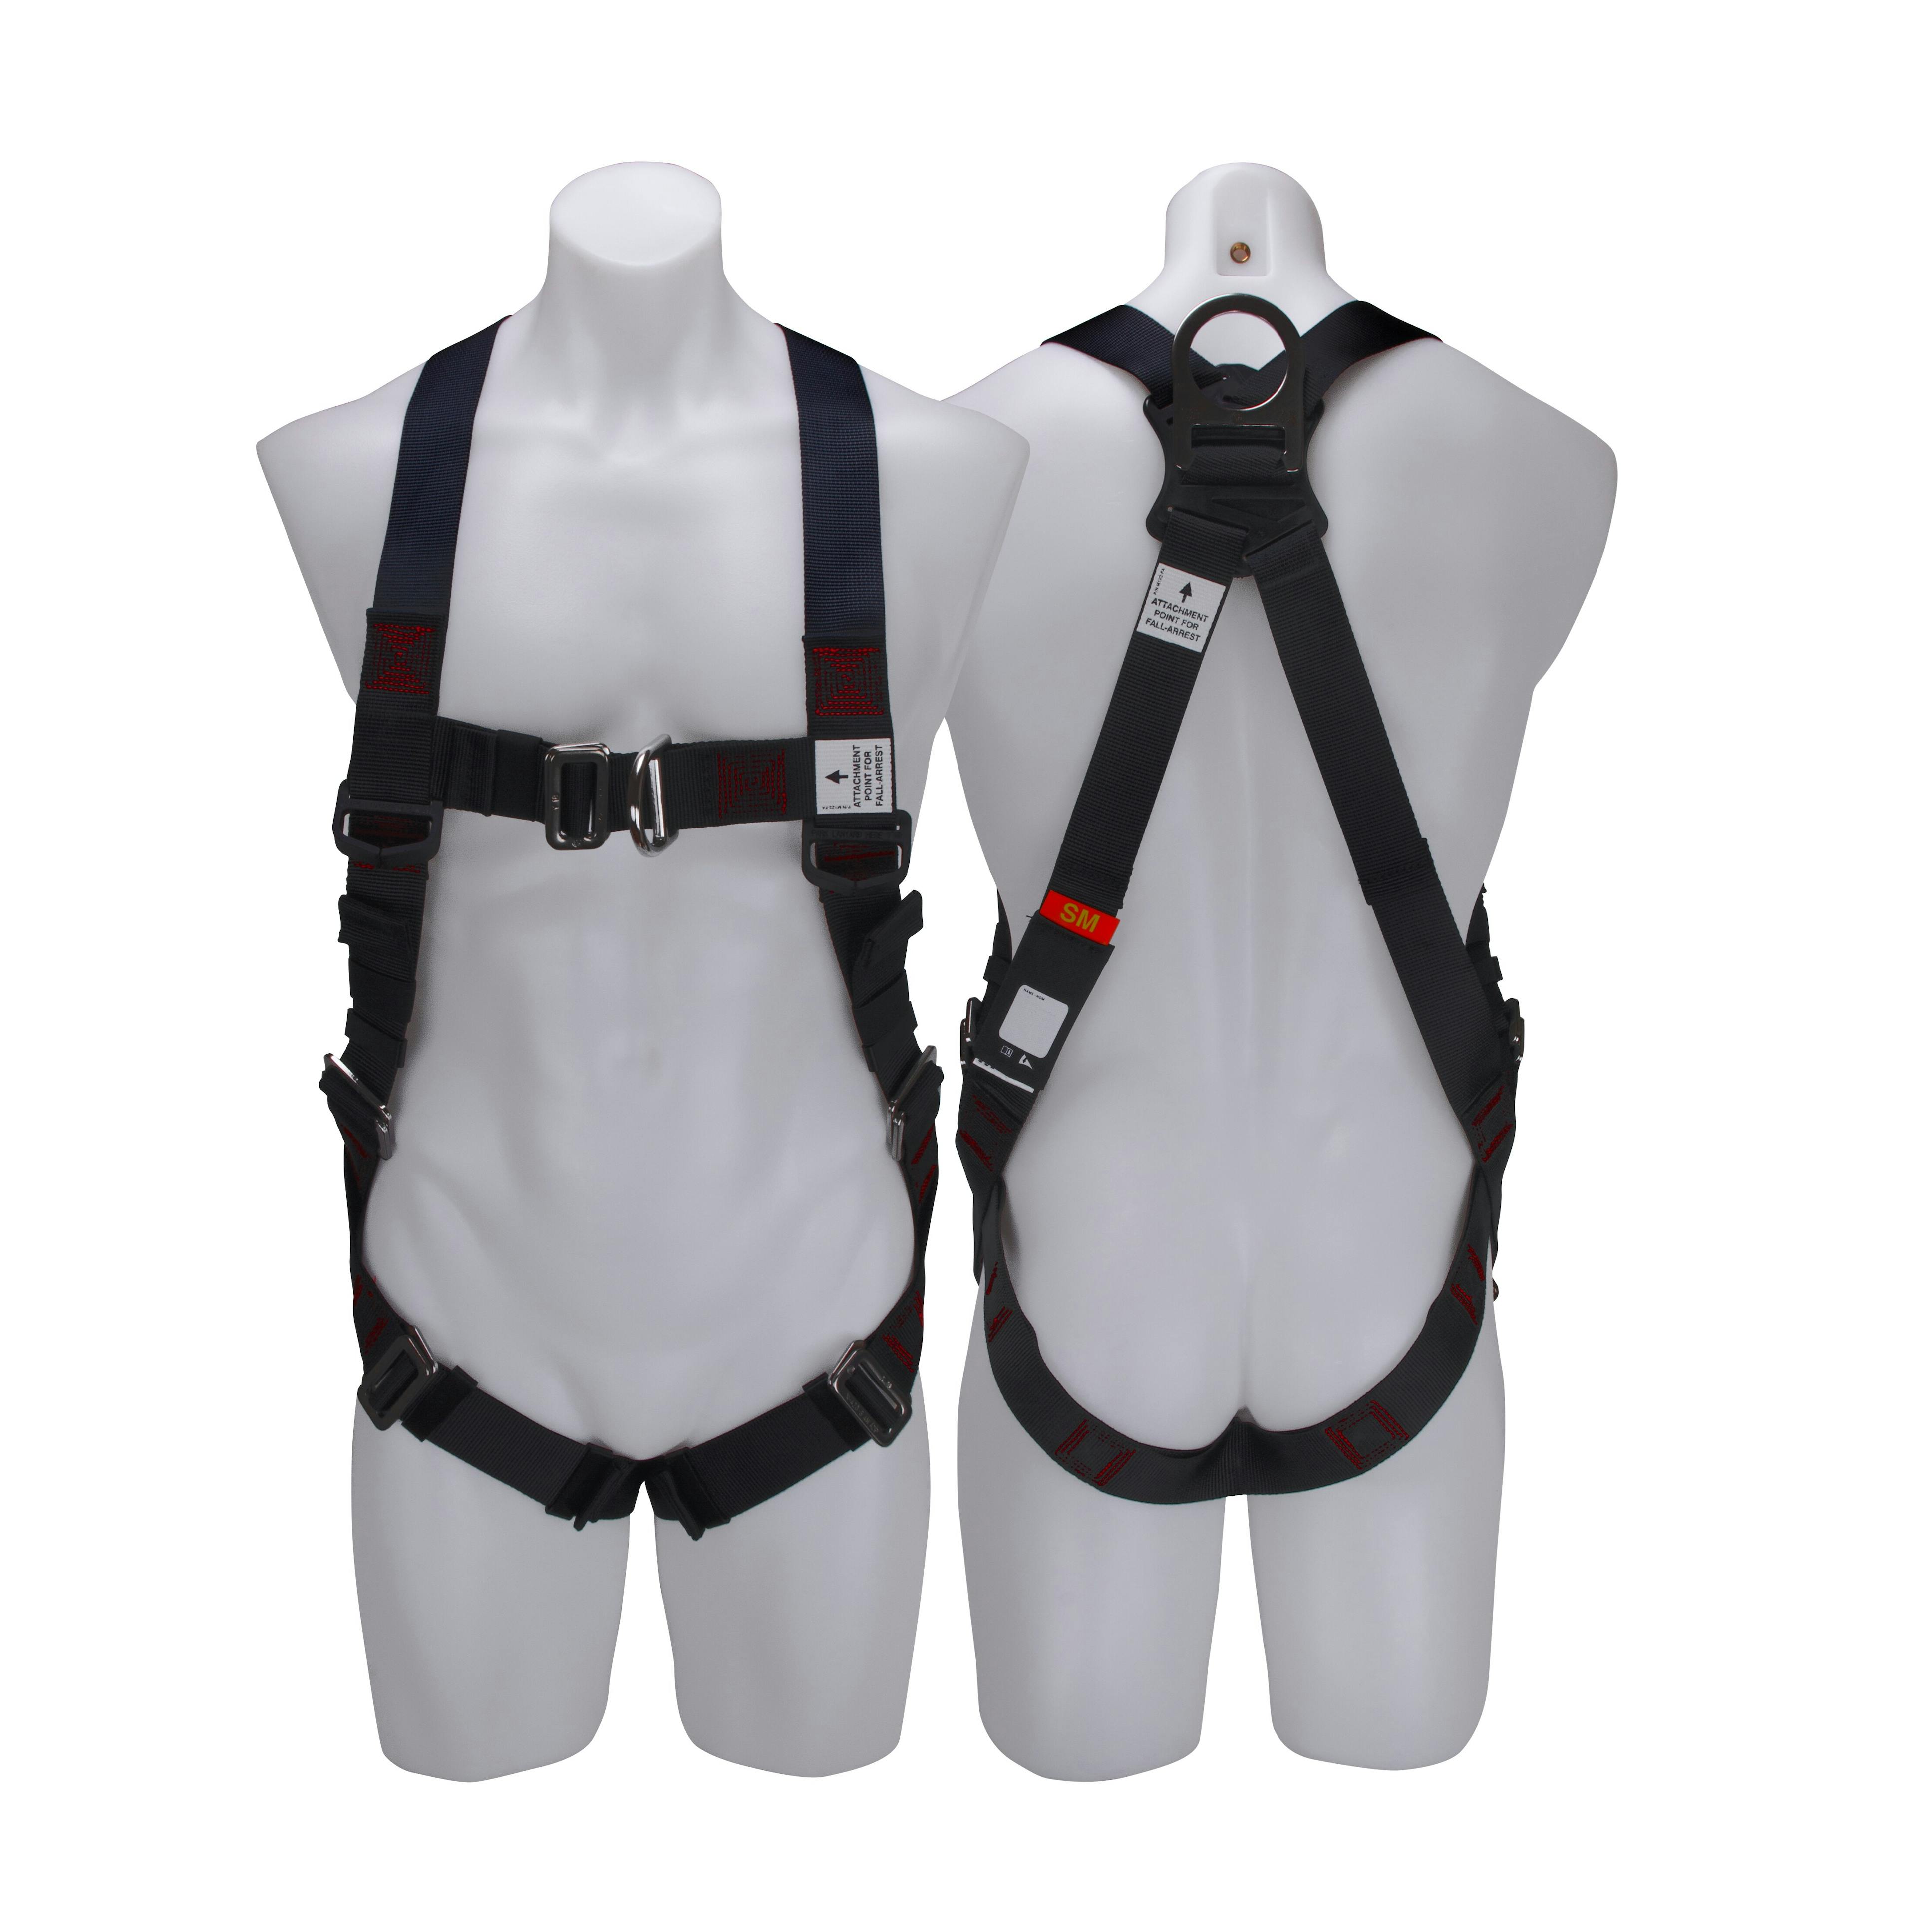 3M™ PROTECTA® X Riggers Harness with Stainless Steel and Pass Through Buckles 1161663, Red and Black, Extra Large, 1 EA/Case